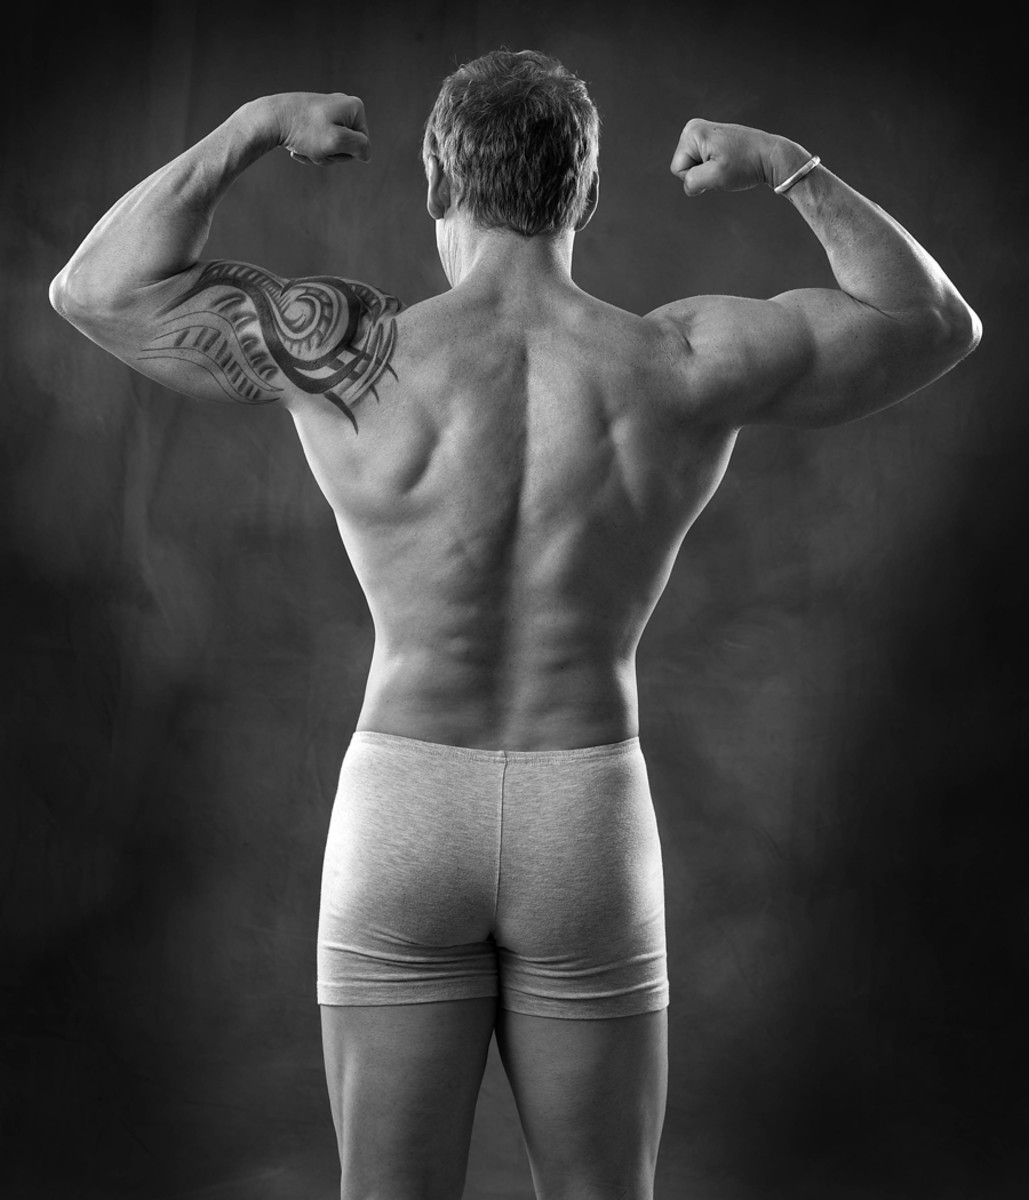 It does not take much work to build a muscular back...but you do have to train hard.